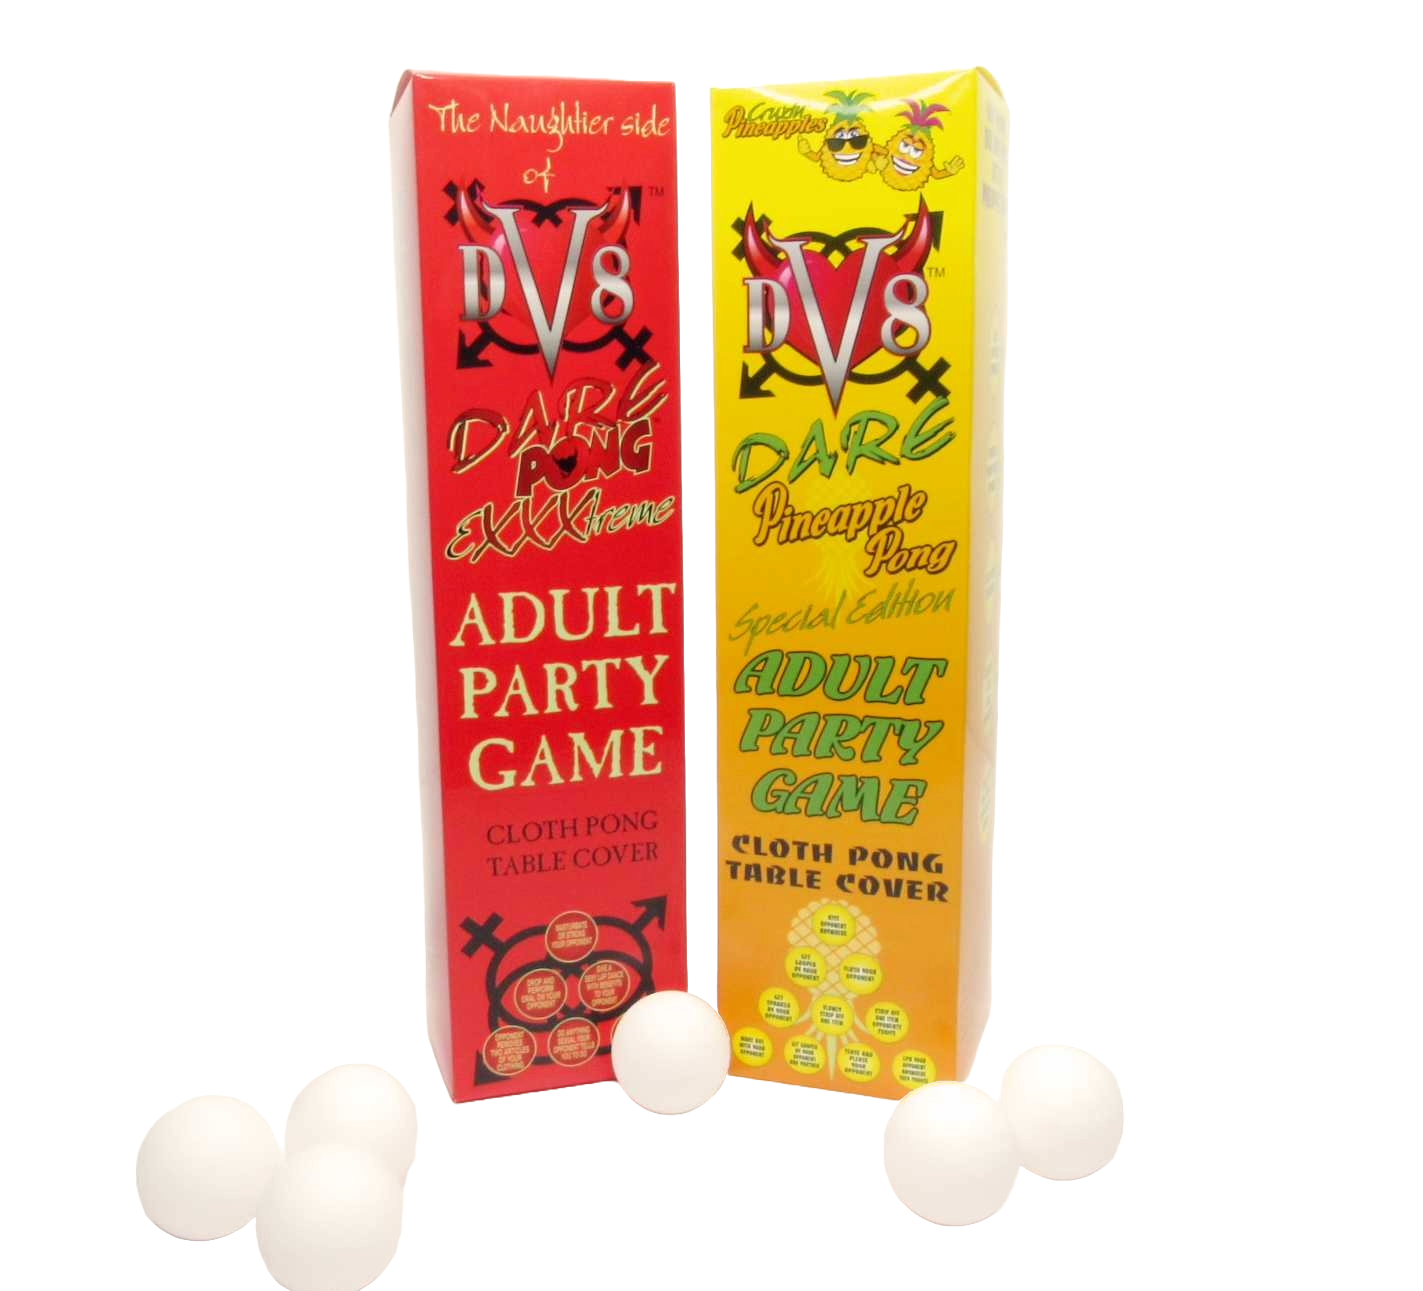 DV8 Dare™ Pineapple Pong Cruzin' Pineapples Special Edition - The Playful Icebreaker Adult Party Game